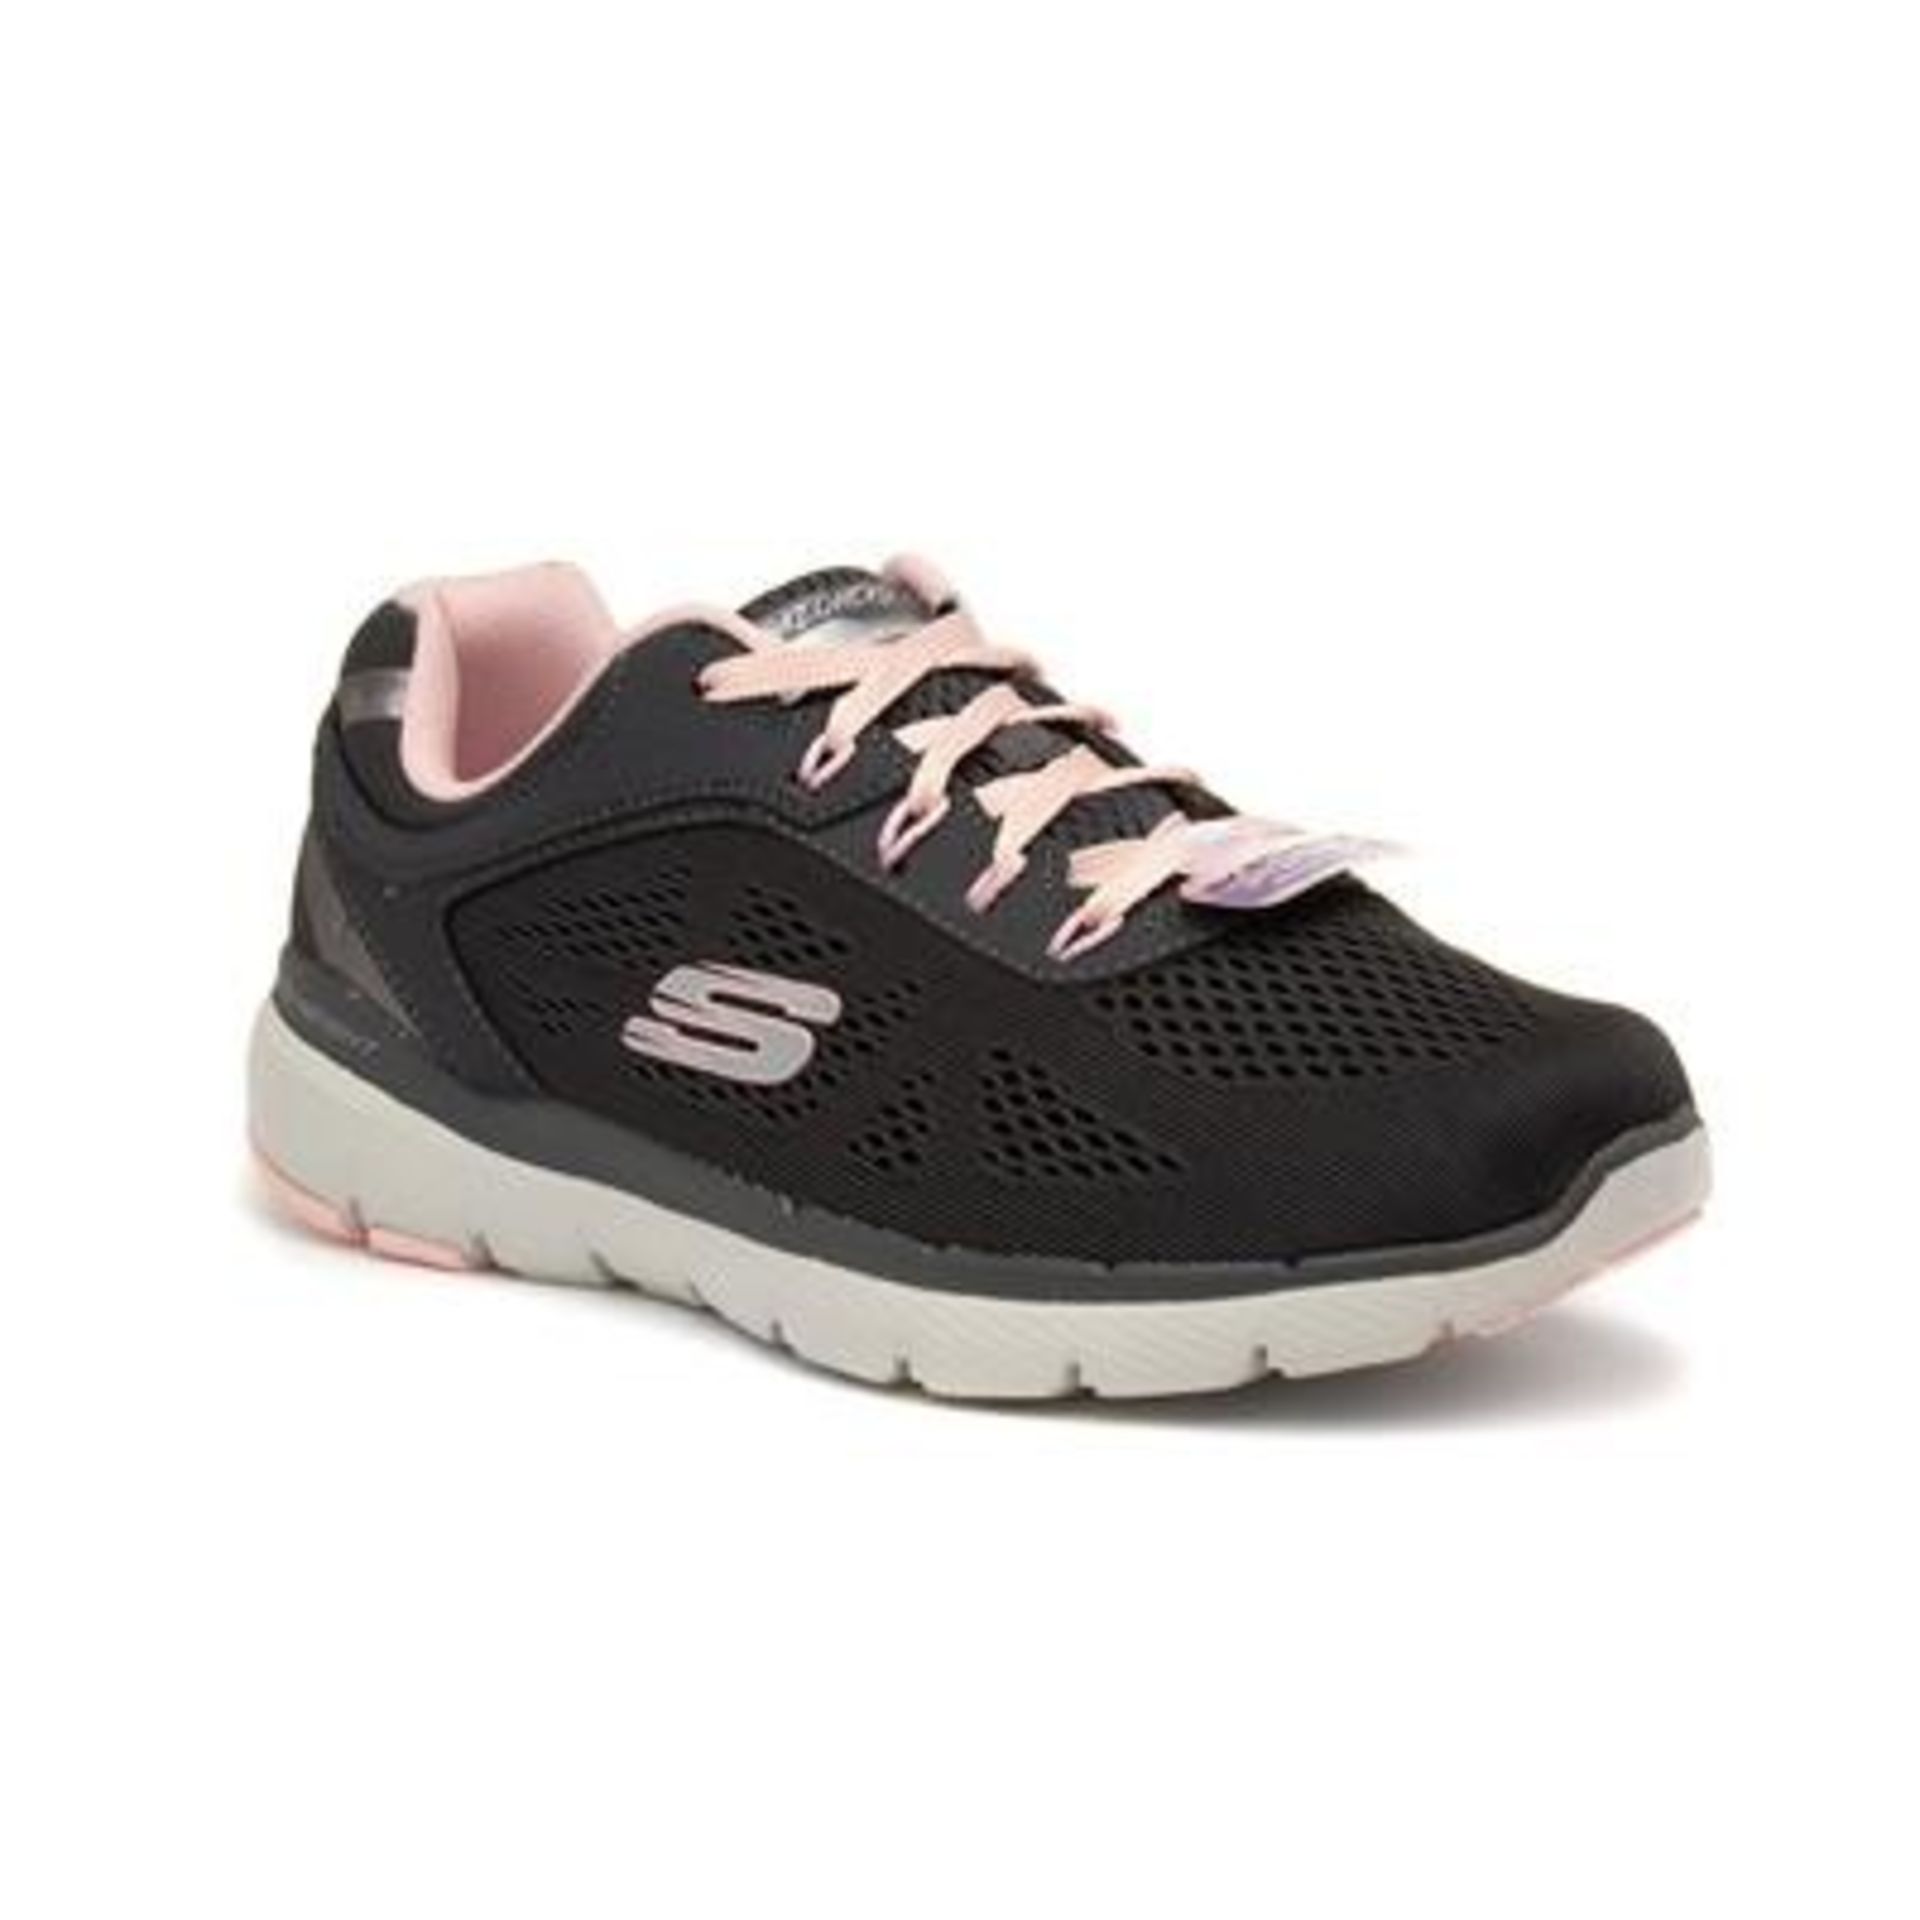 UNBOXED Skechers Flex Appeal Moving Trainers SIZE 7 RRP £35Condition ReportAppraisal Available on